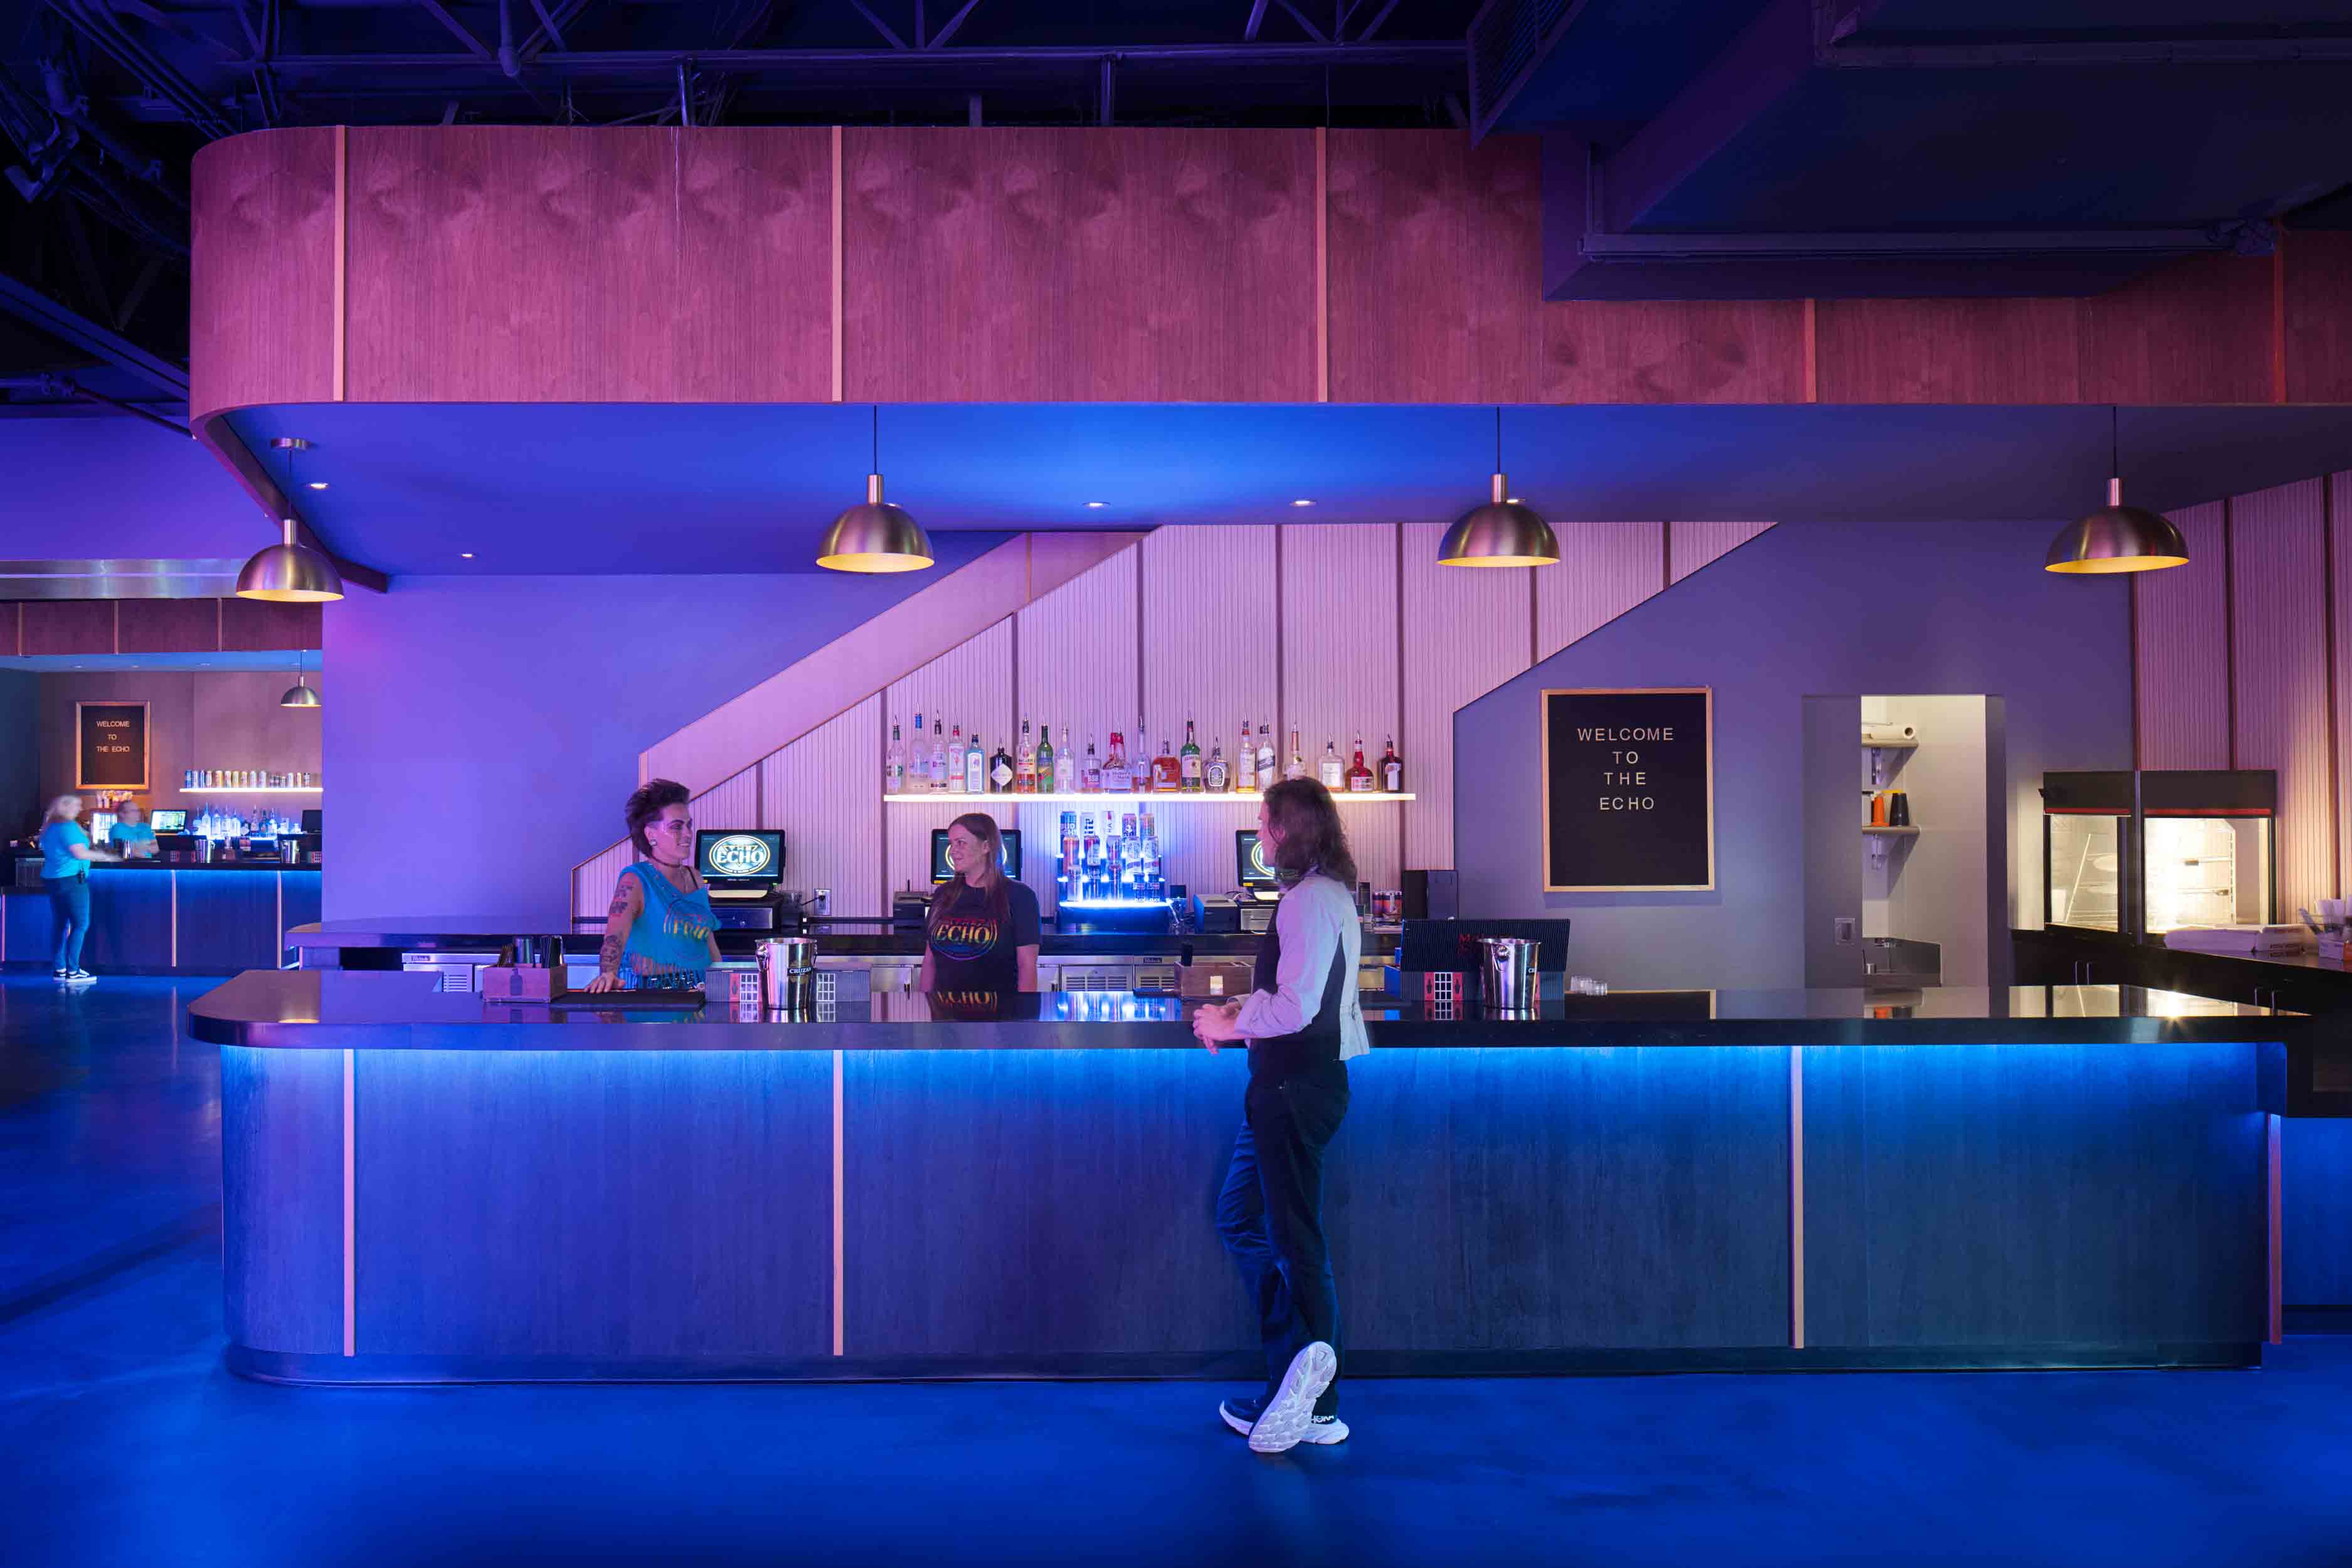 The Echo Lounge bar with vibrant blue and pink lighting